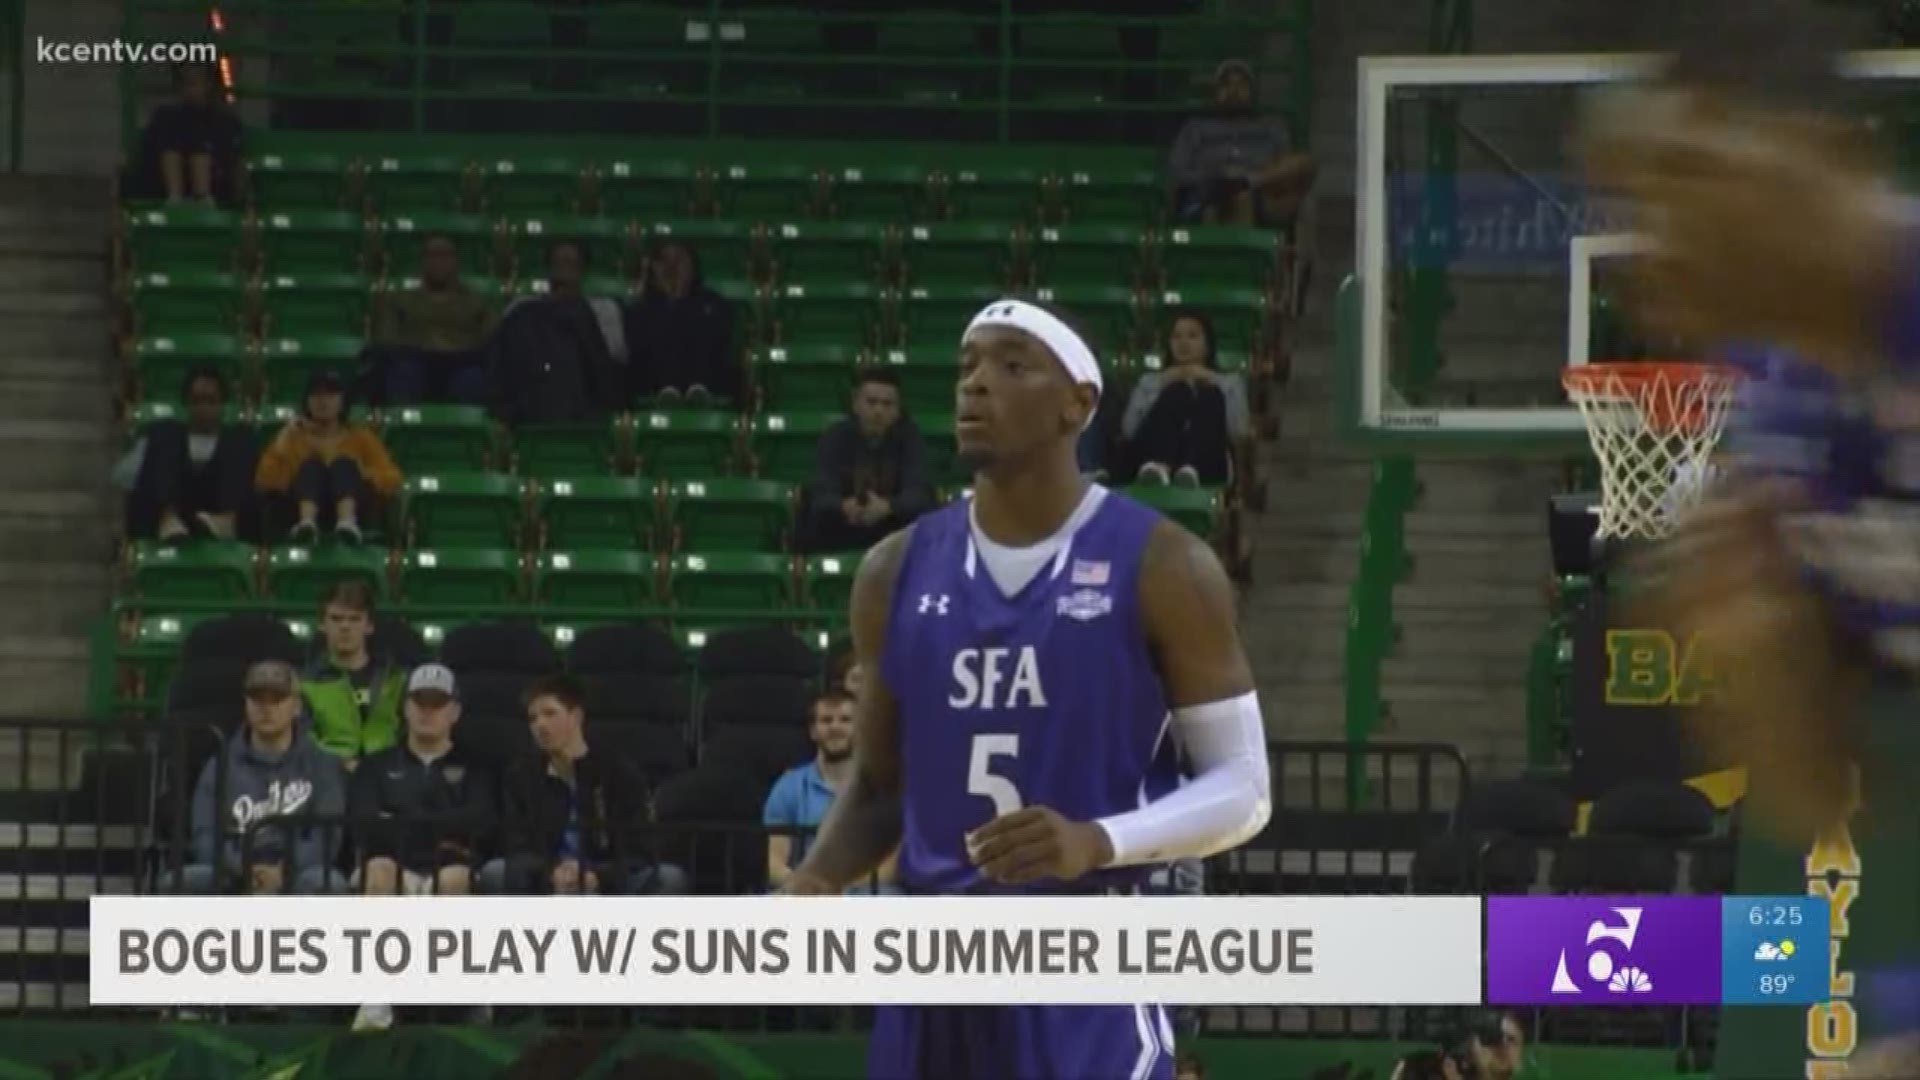 The Killeen native is heading to Las Vegas to be apart of the Phoenix Suns Summer League team. He's the first Stephen F. Austin player to earn a Summer League roster spot in three years.